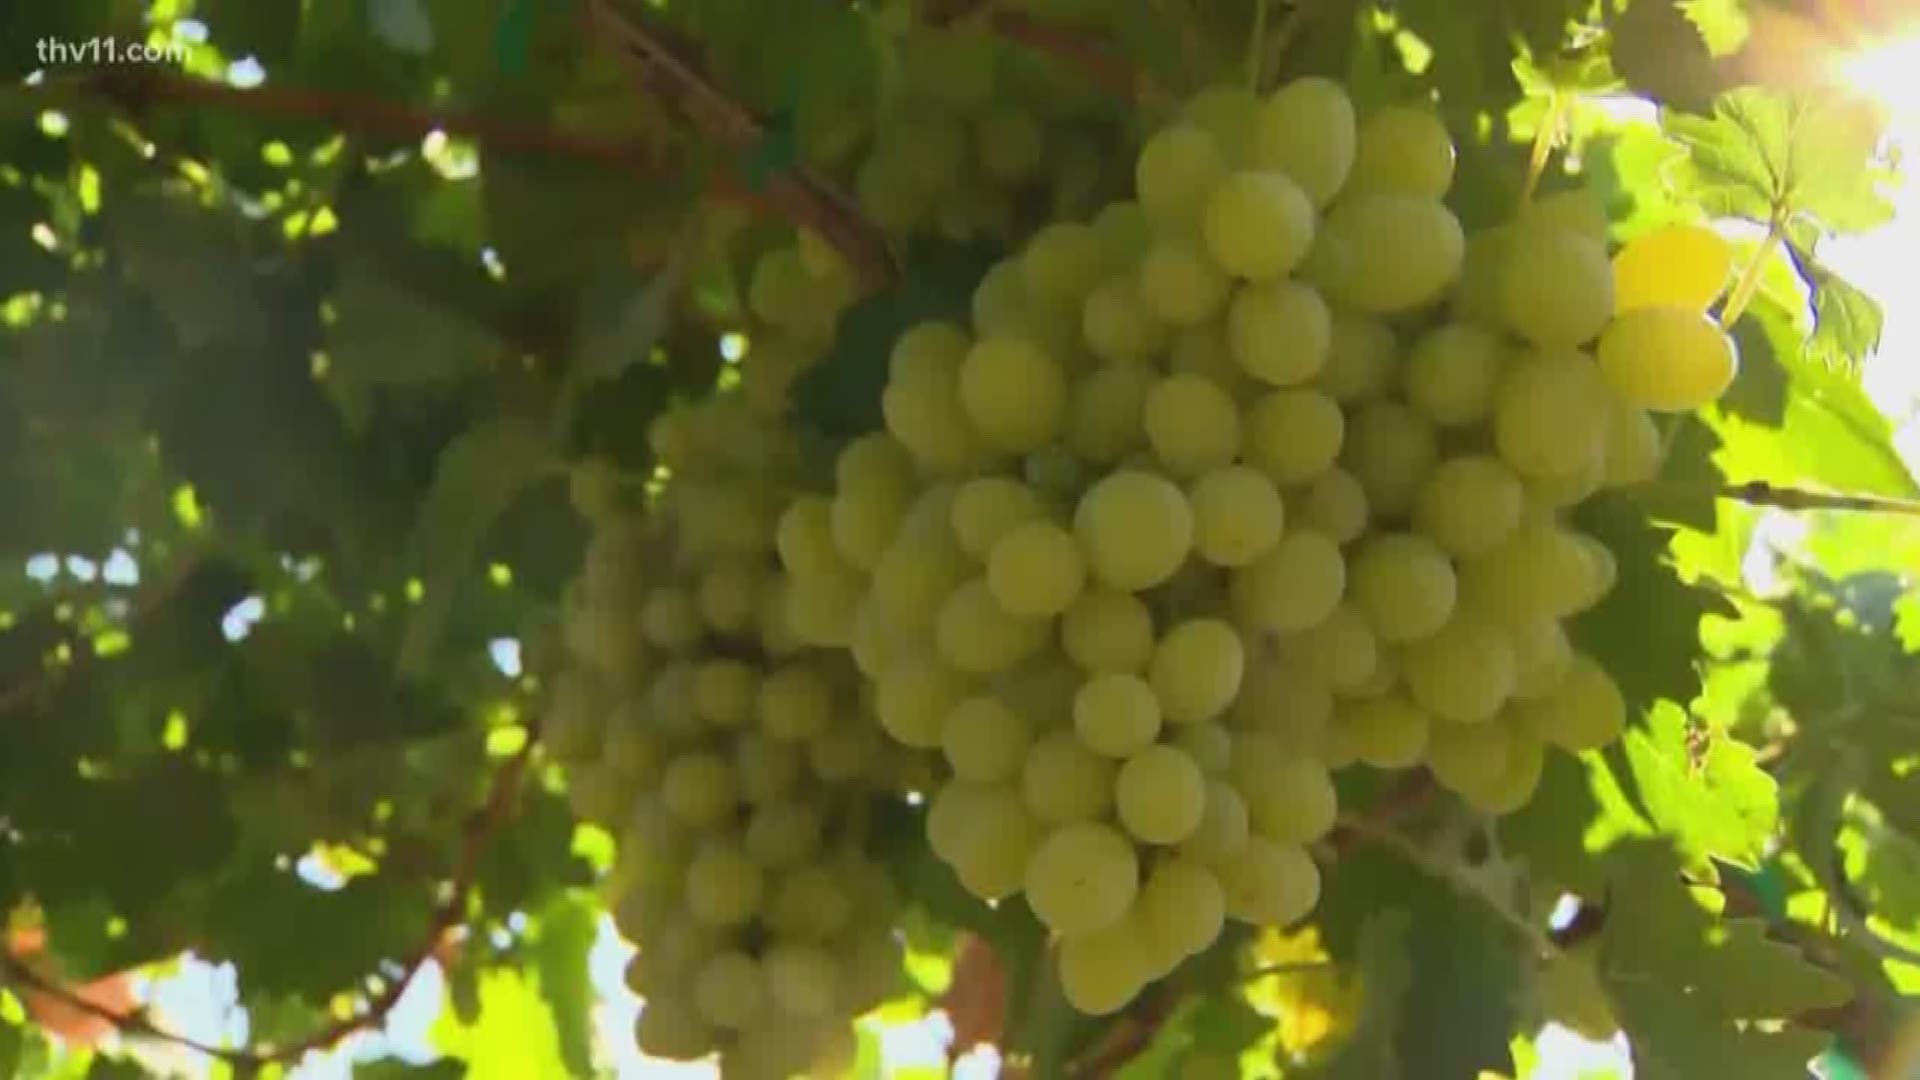 Cotton candy grapes have connections to Arkansas